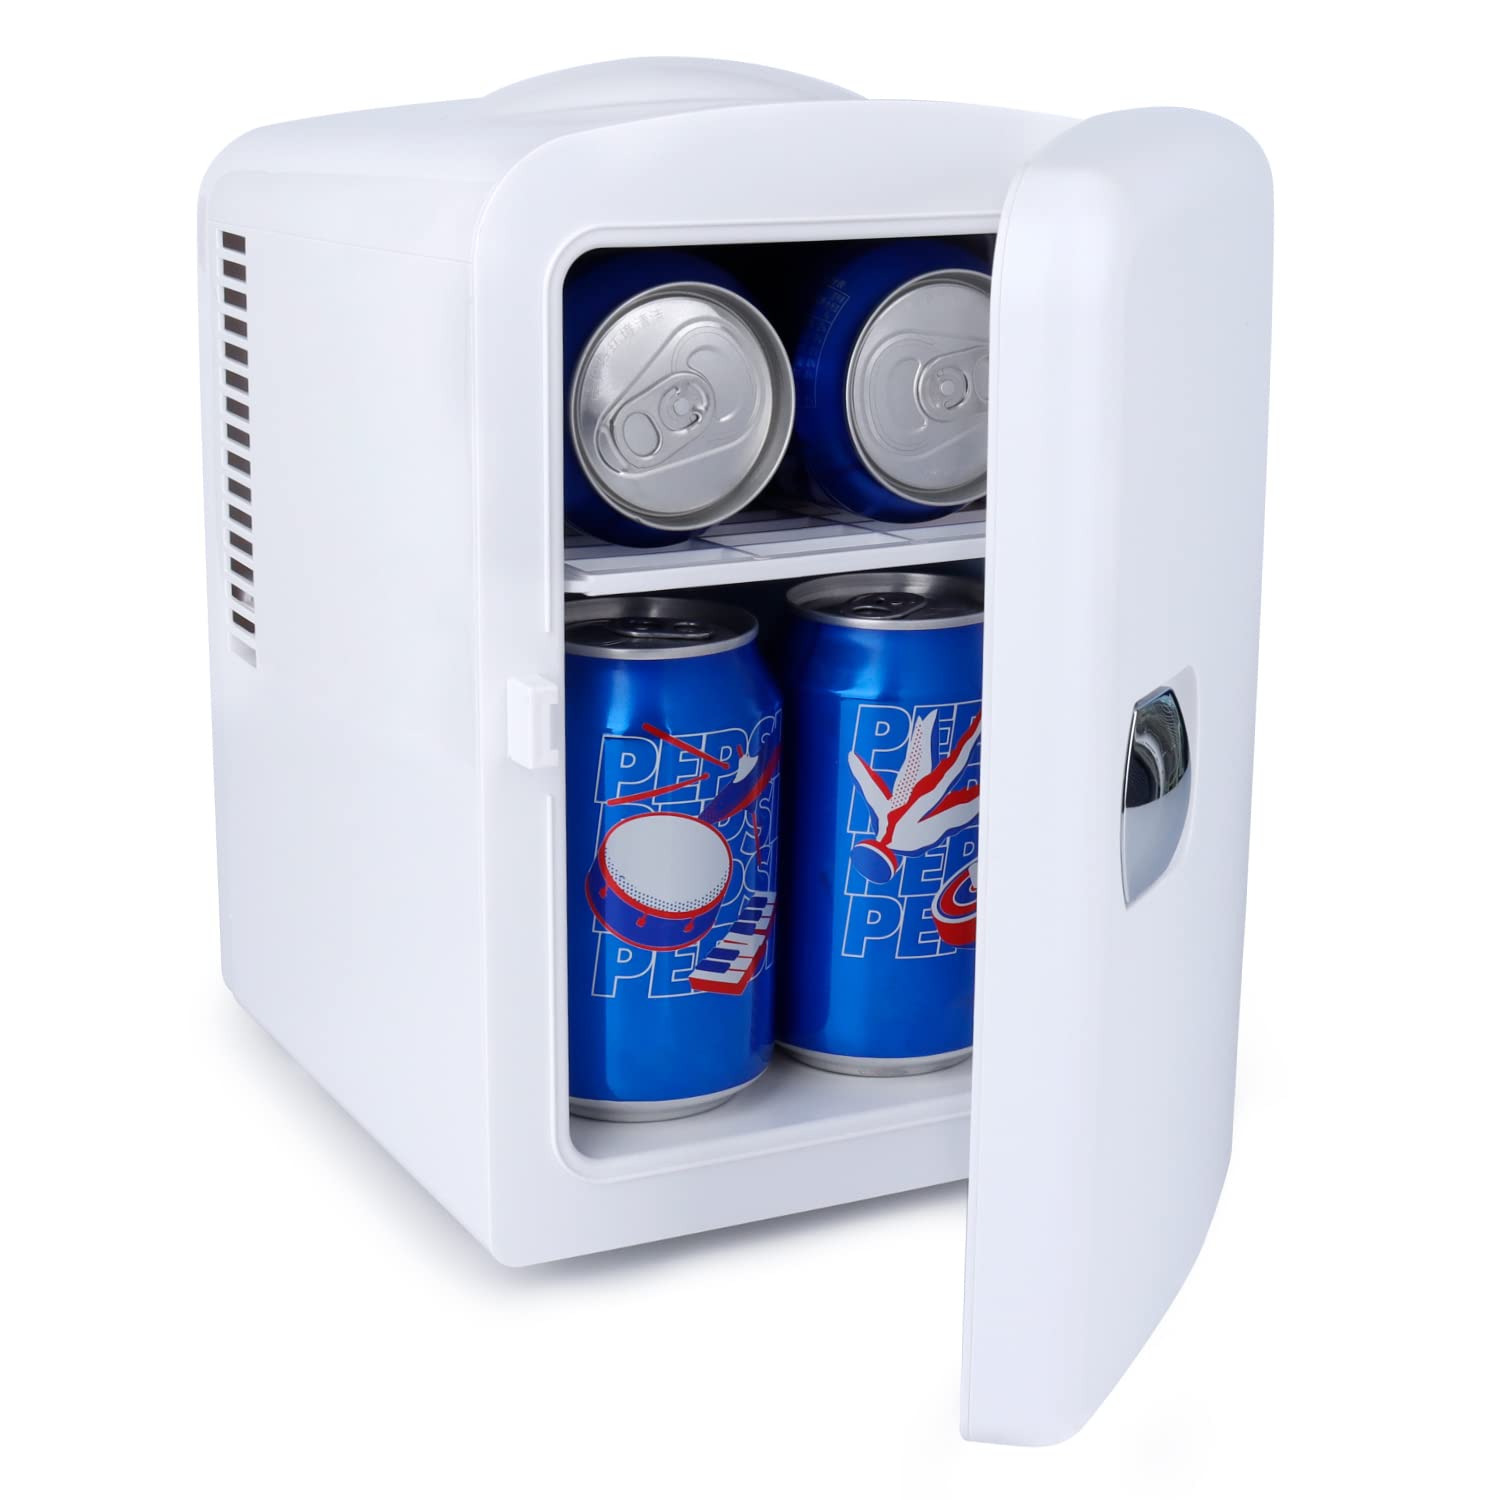 Living Enrichment Mini Fridge Chilling and Warming, Portable Compact Refrigerator AC/DC Power, 4L 6 Cans Capacity, for Skincare, Foods, Medications, Milk, Home and Travel - White